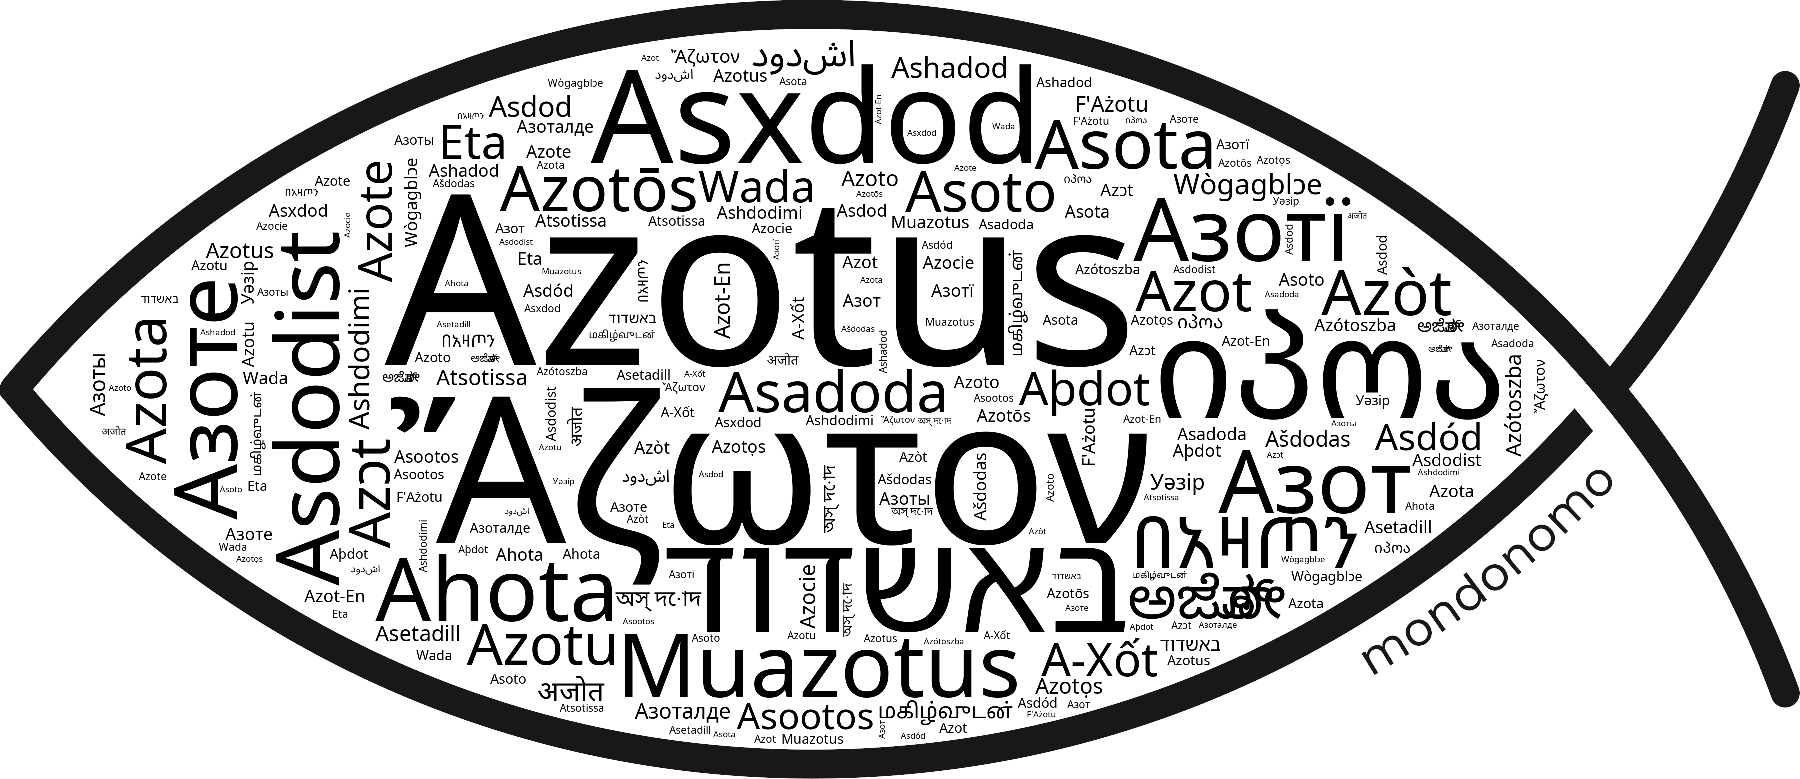 Name Azotus in the world's Bibles